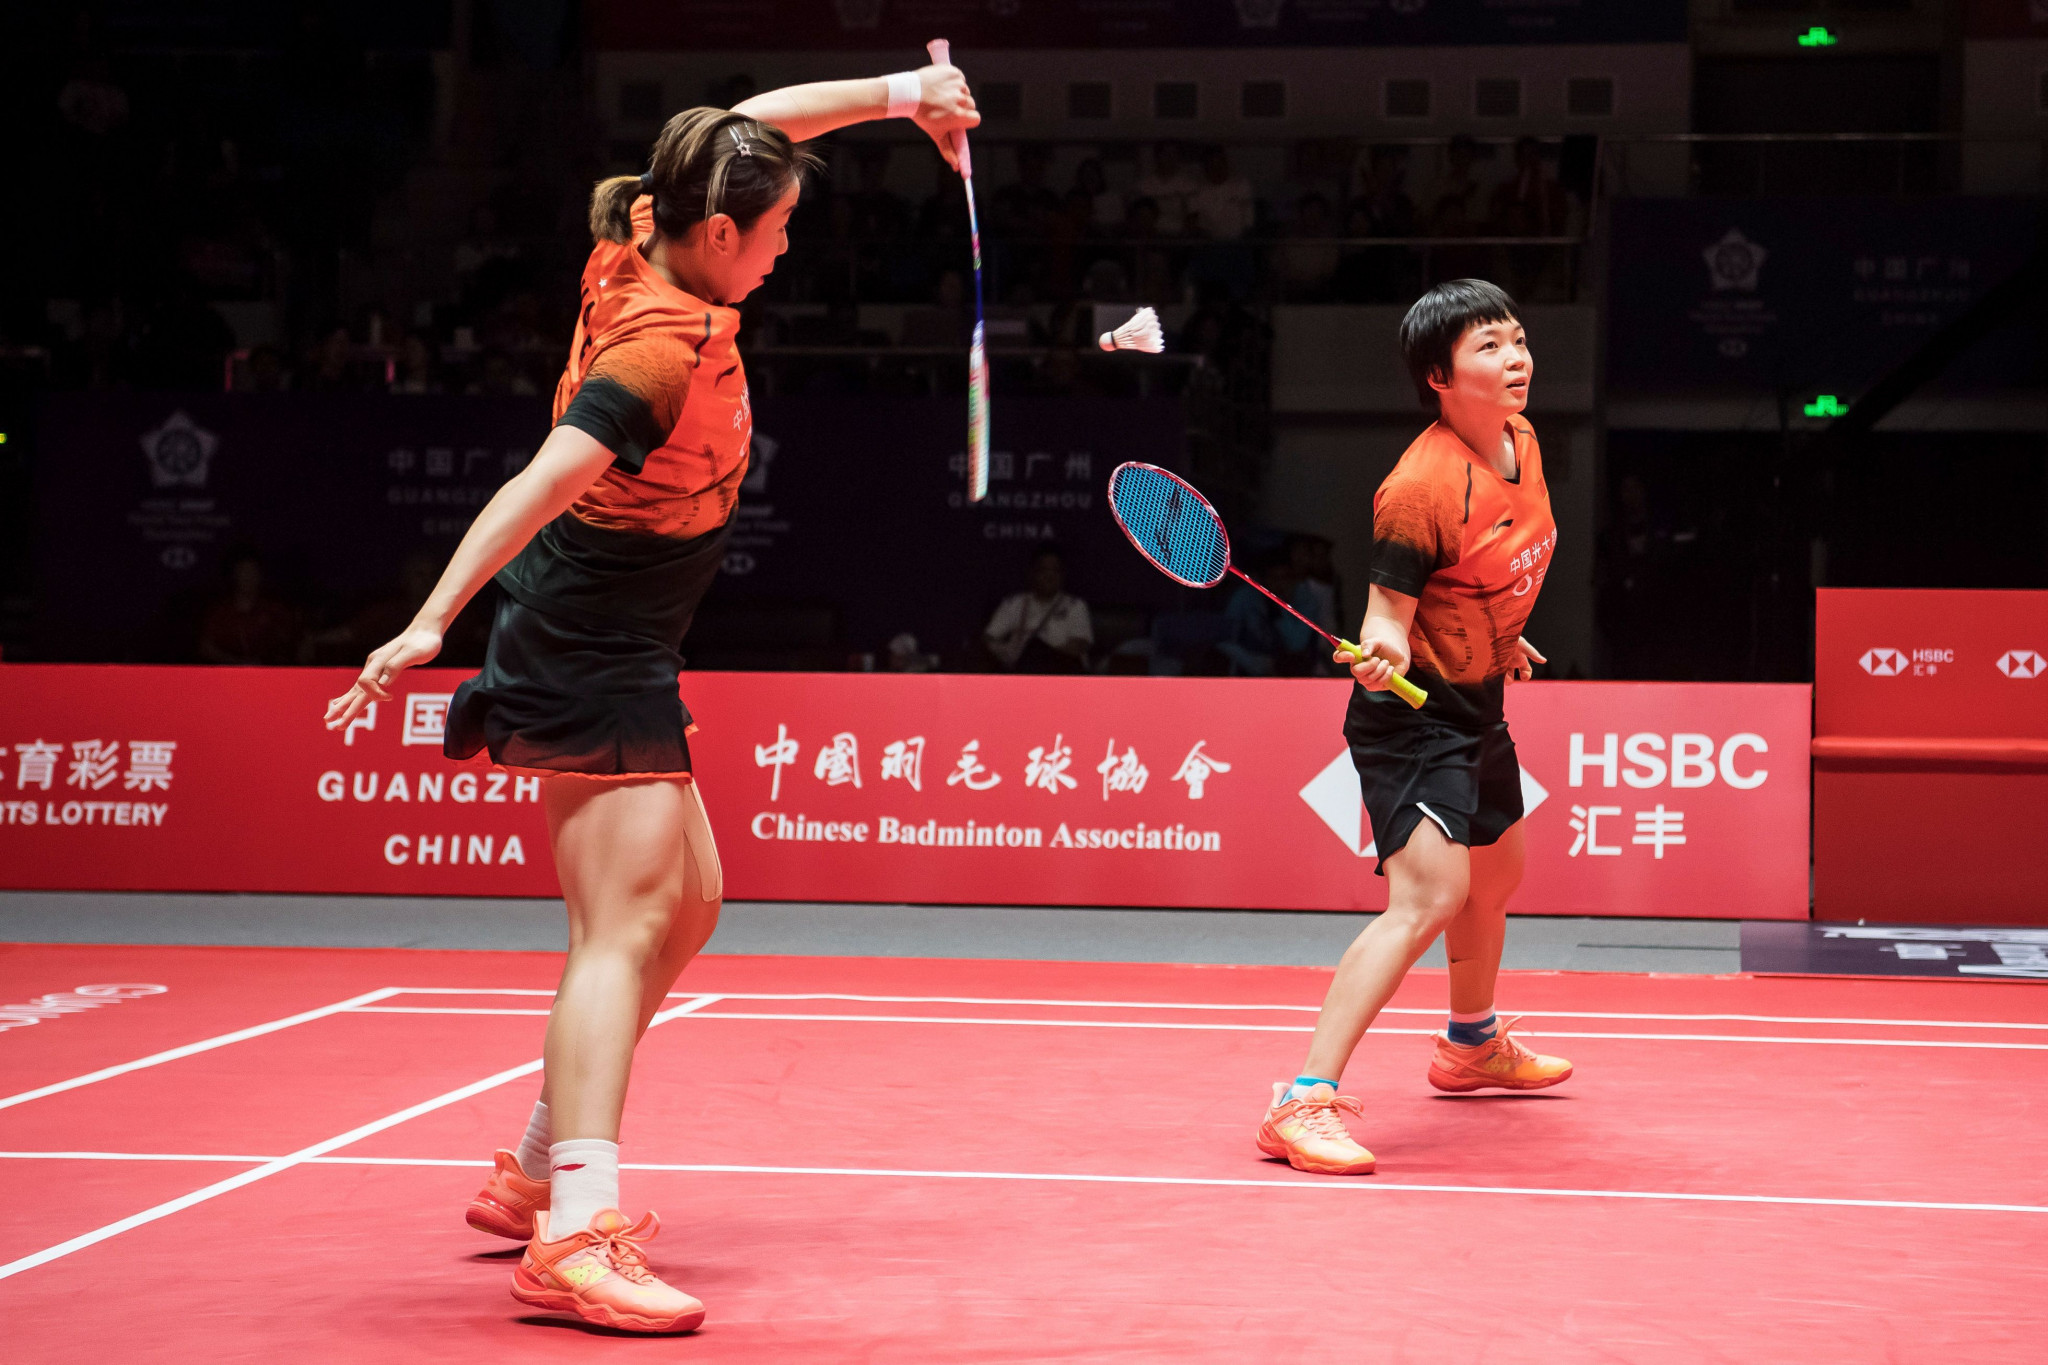 Chen Qingchen and Jia Yifan began the new season with victory ©Getty Images